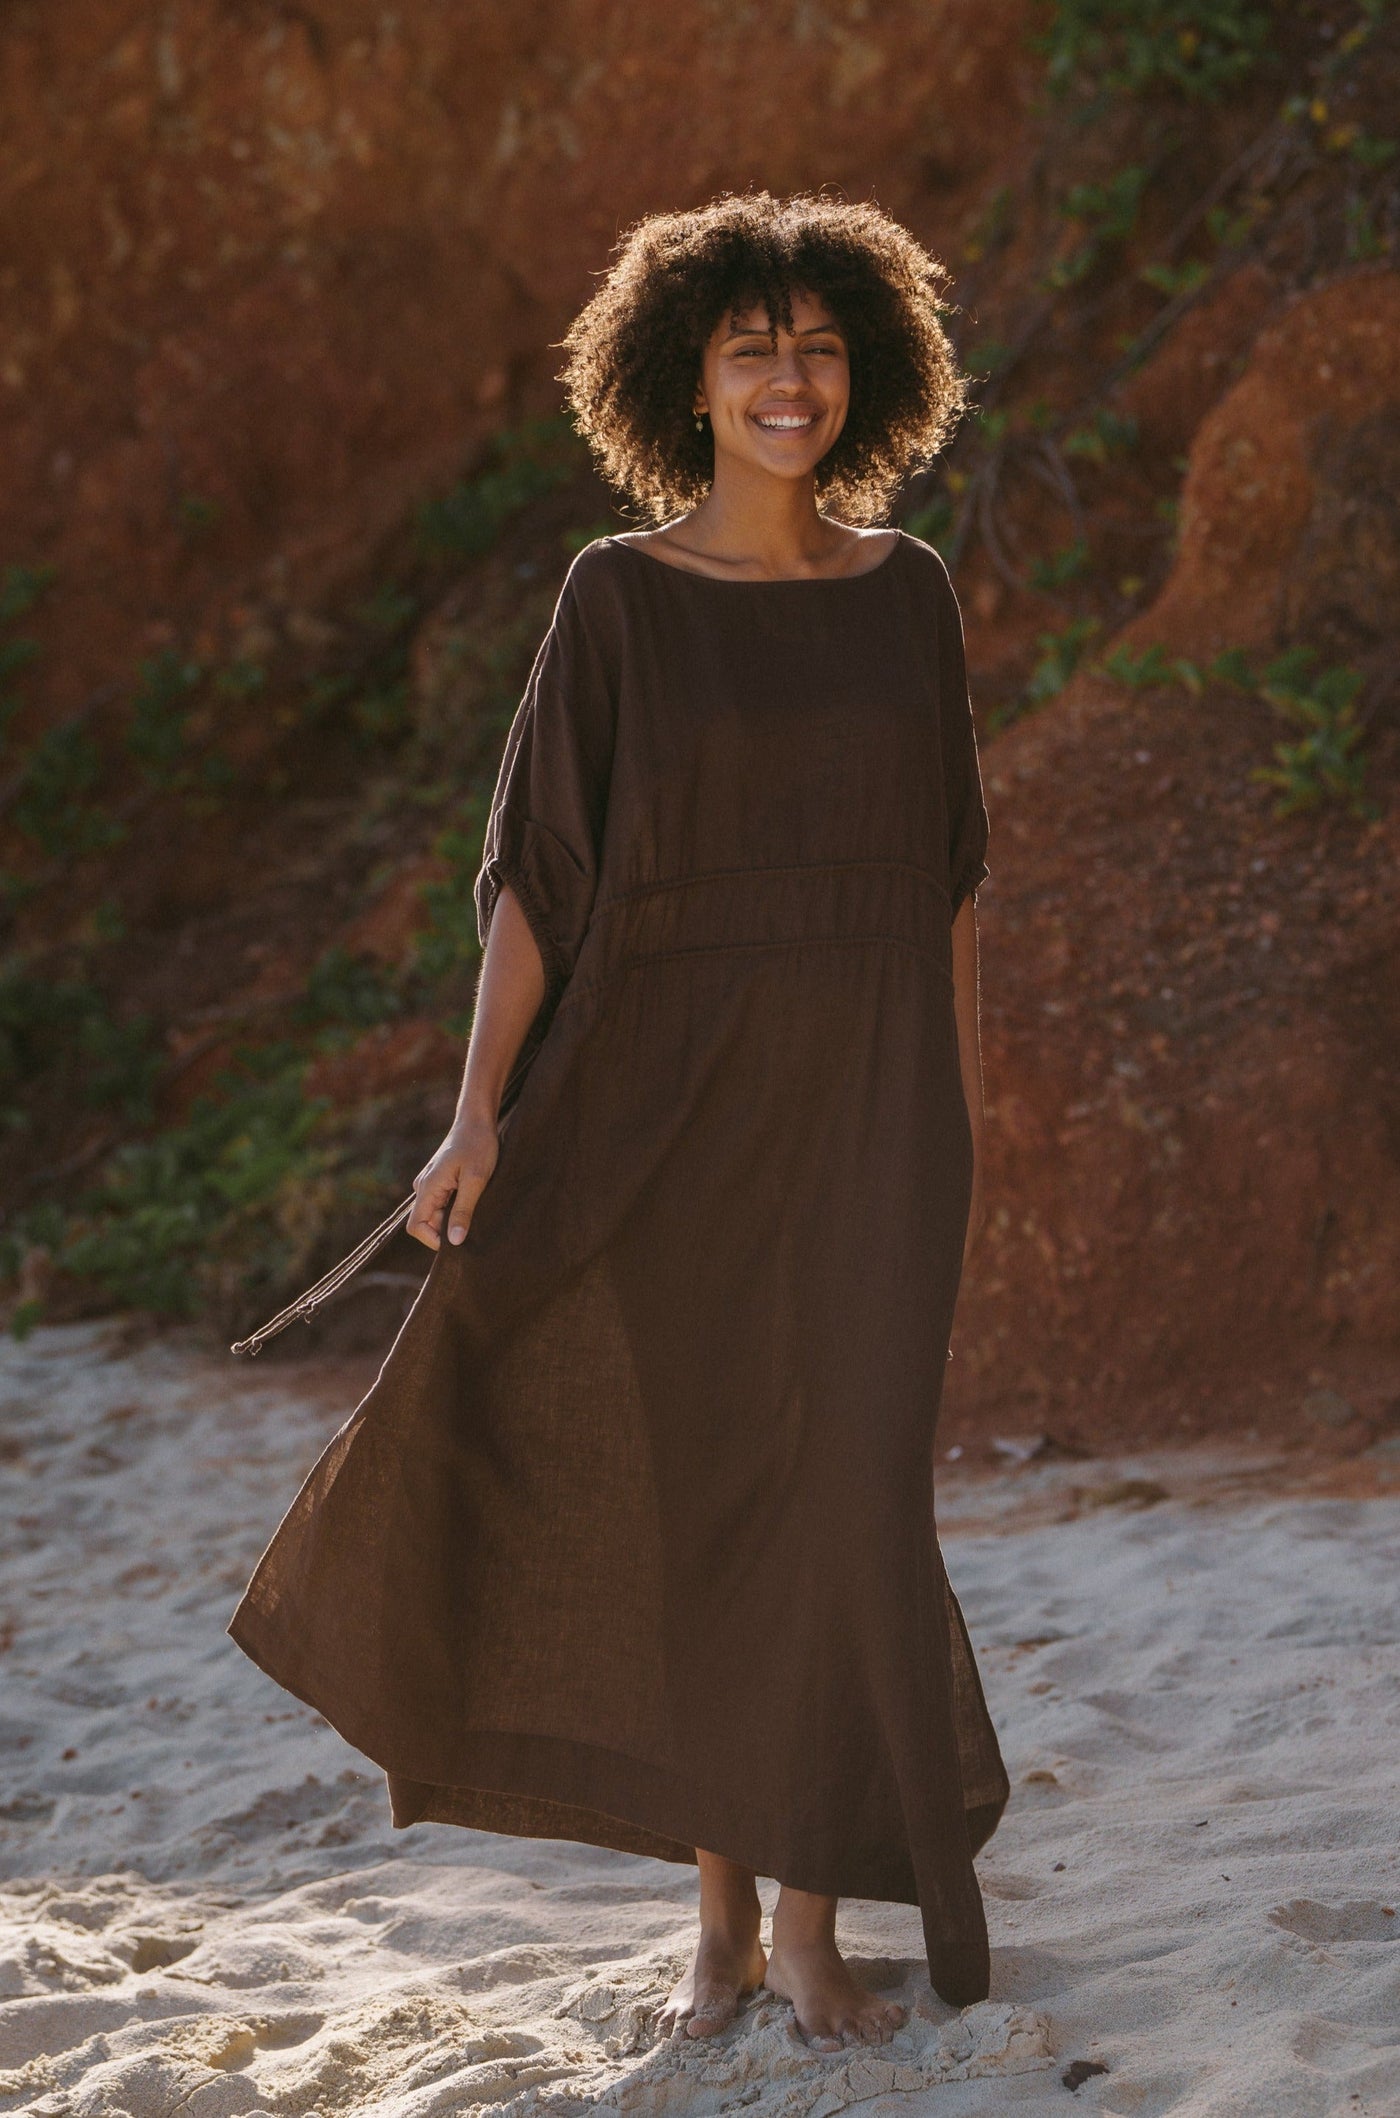 Lilly Pilly Collection Valerie dress made from 100% Organic linen in Chocolate